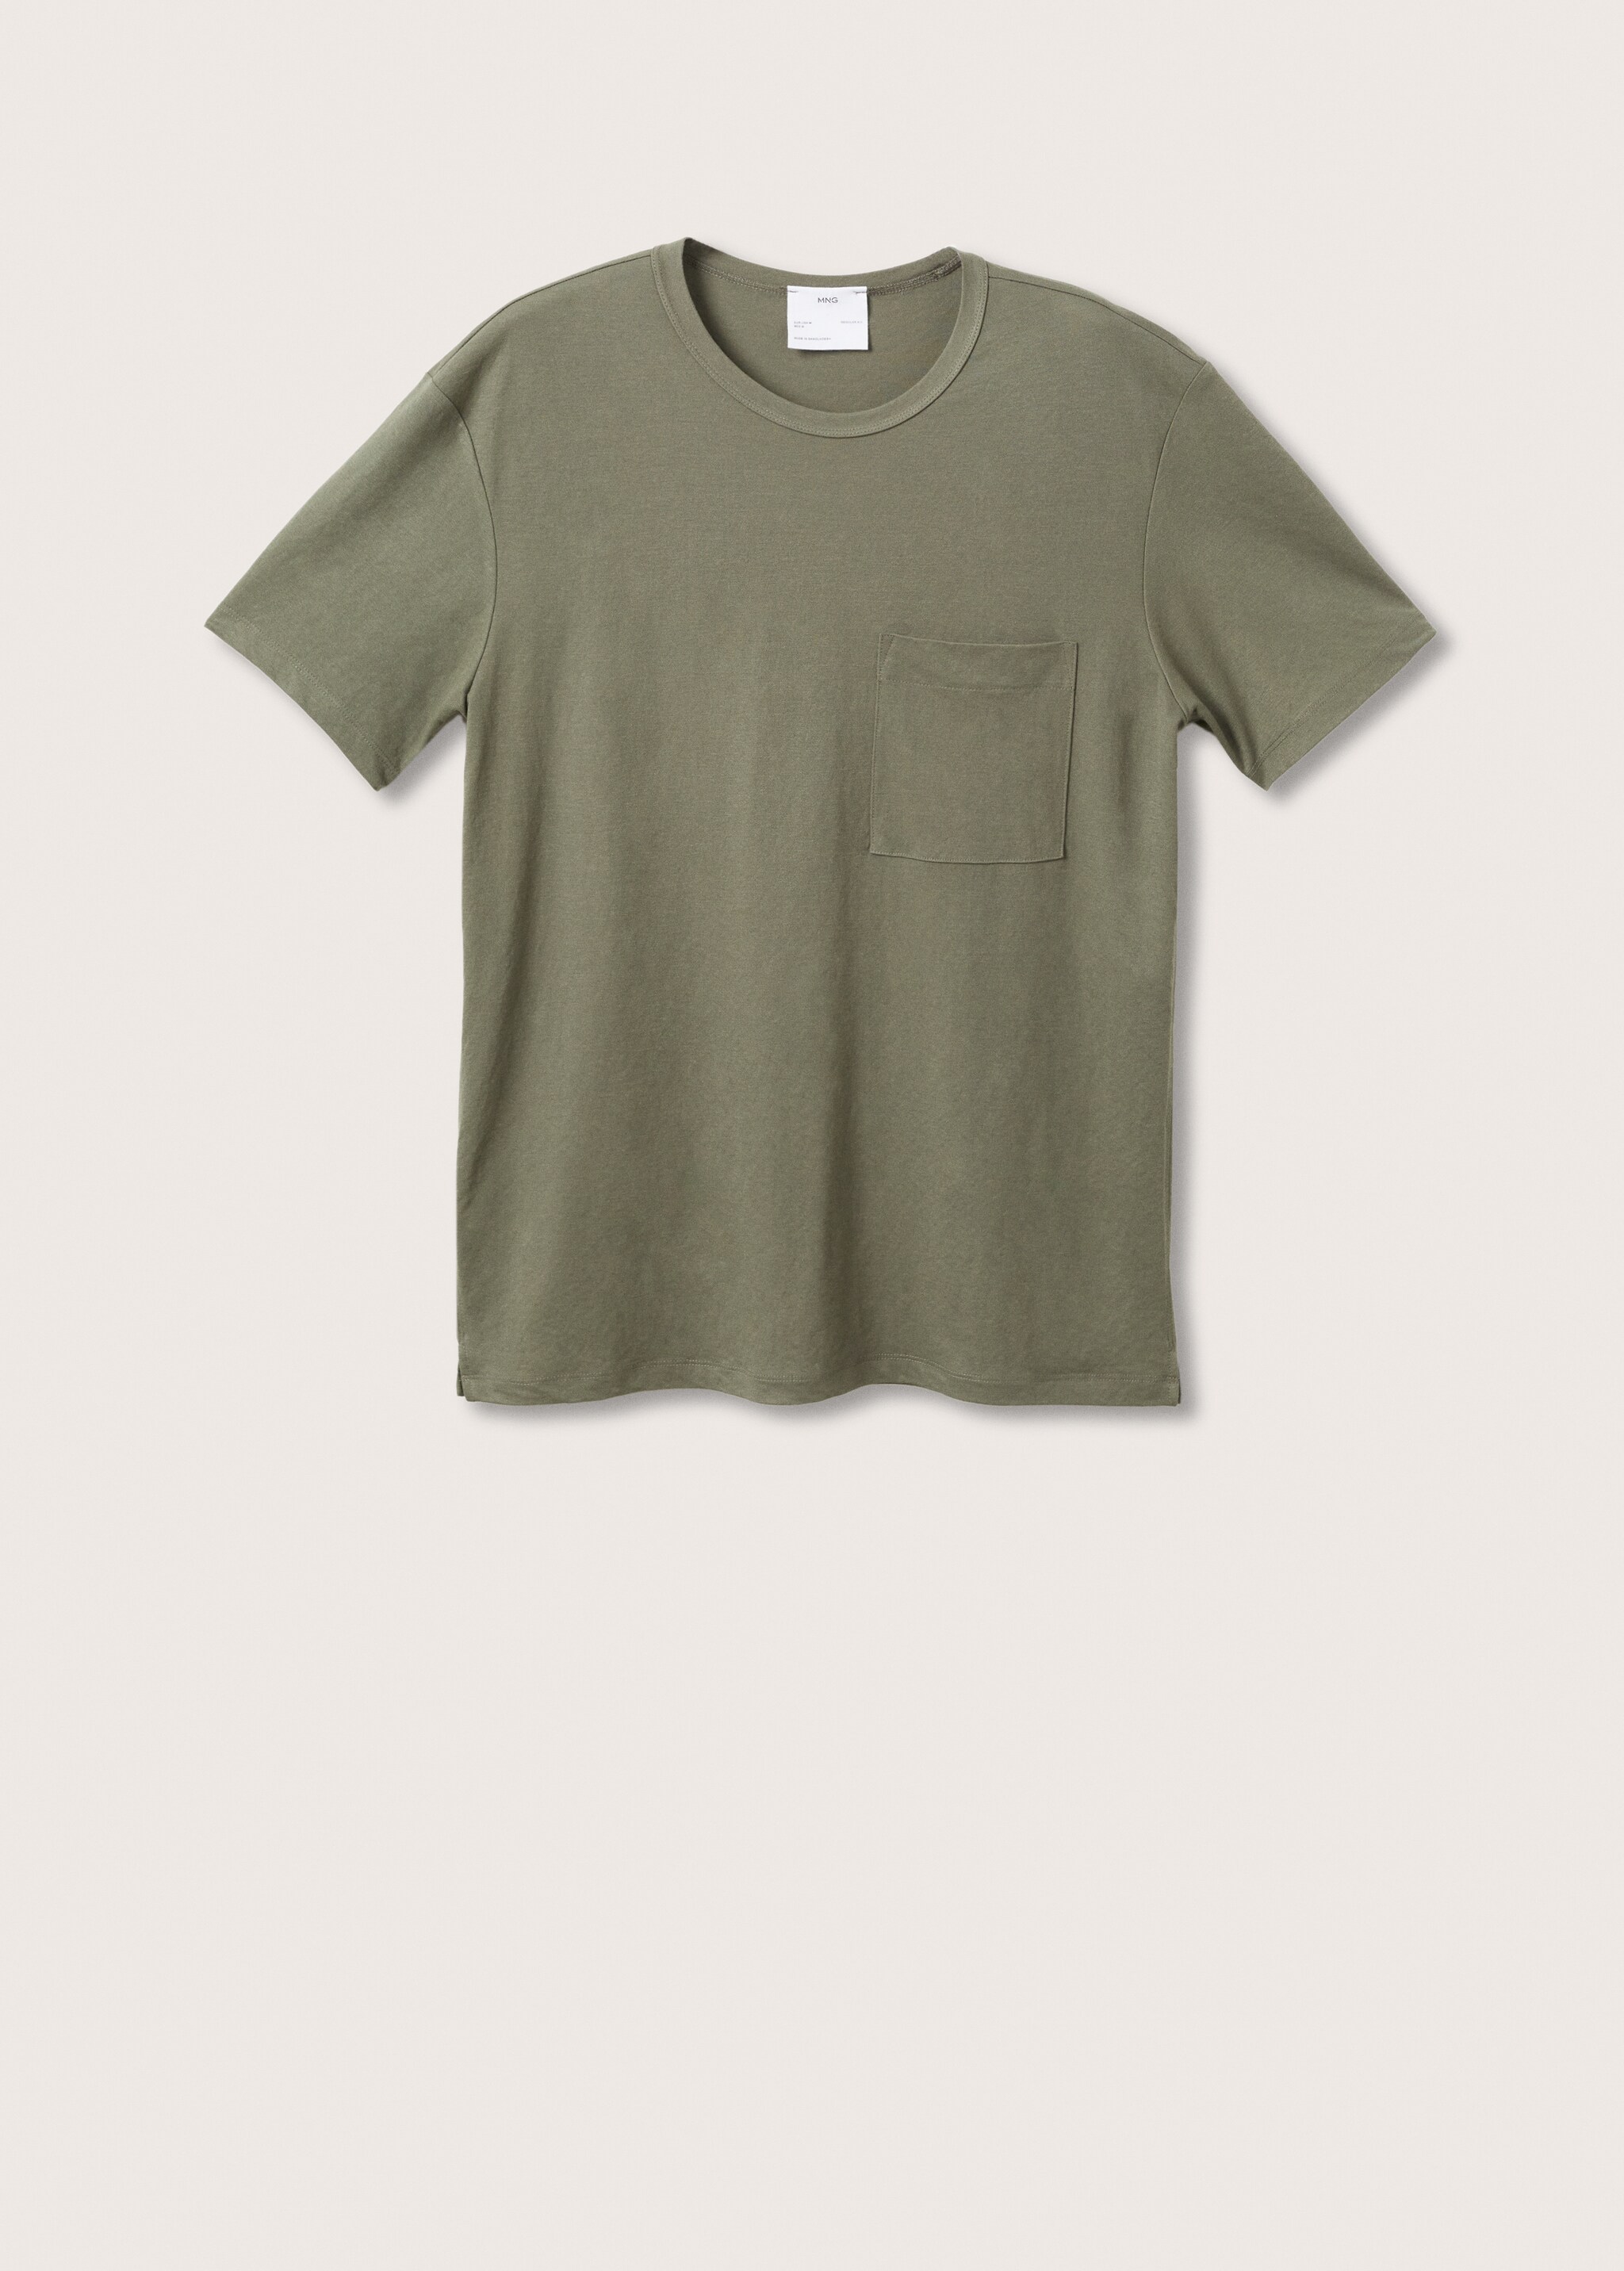 Lightweight t-shirt with pocket - Article without model